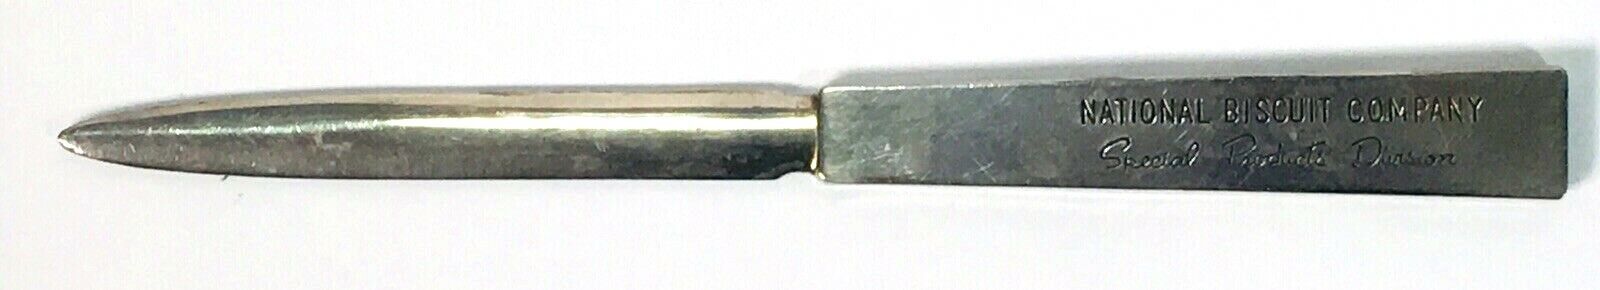 National Biscuit Company Special Products Division Nabisco Letter Opener Nabisco